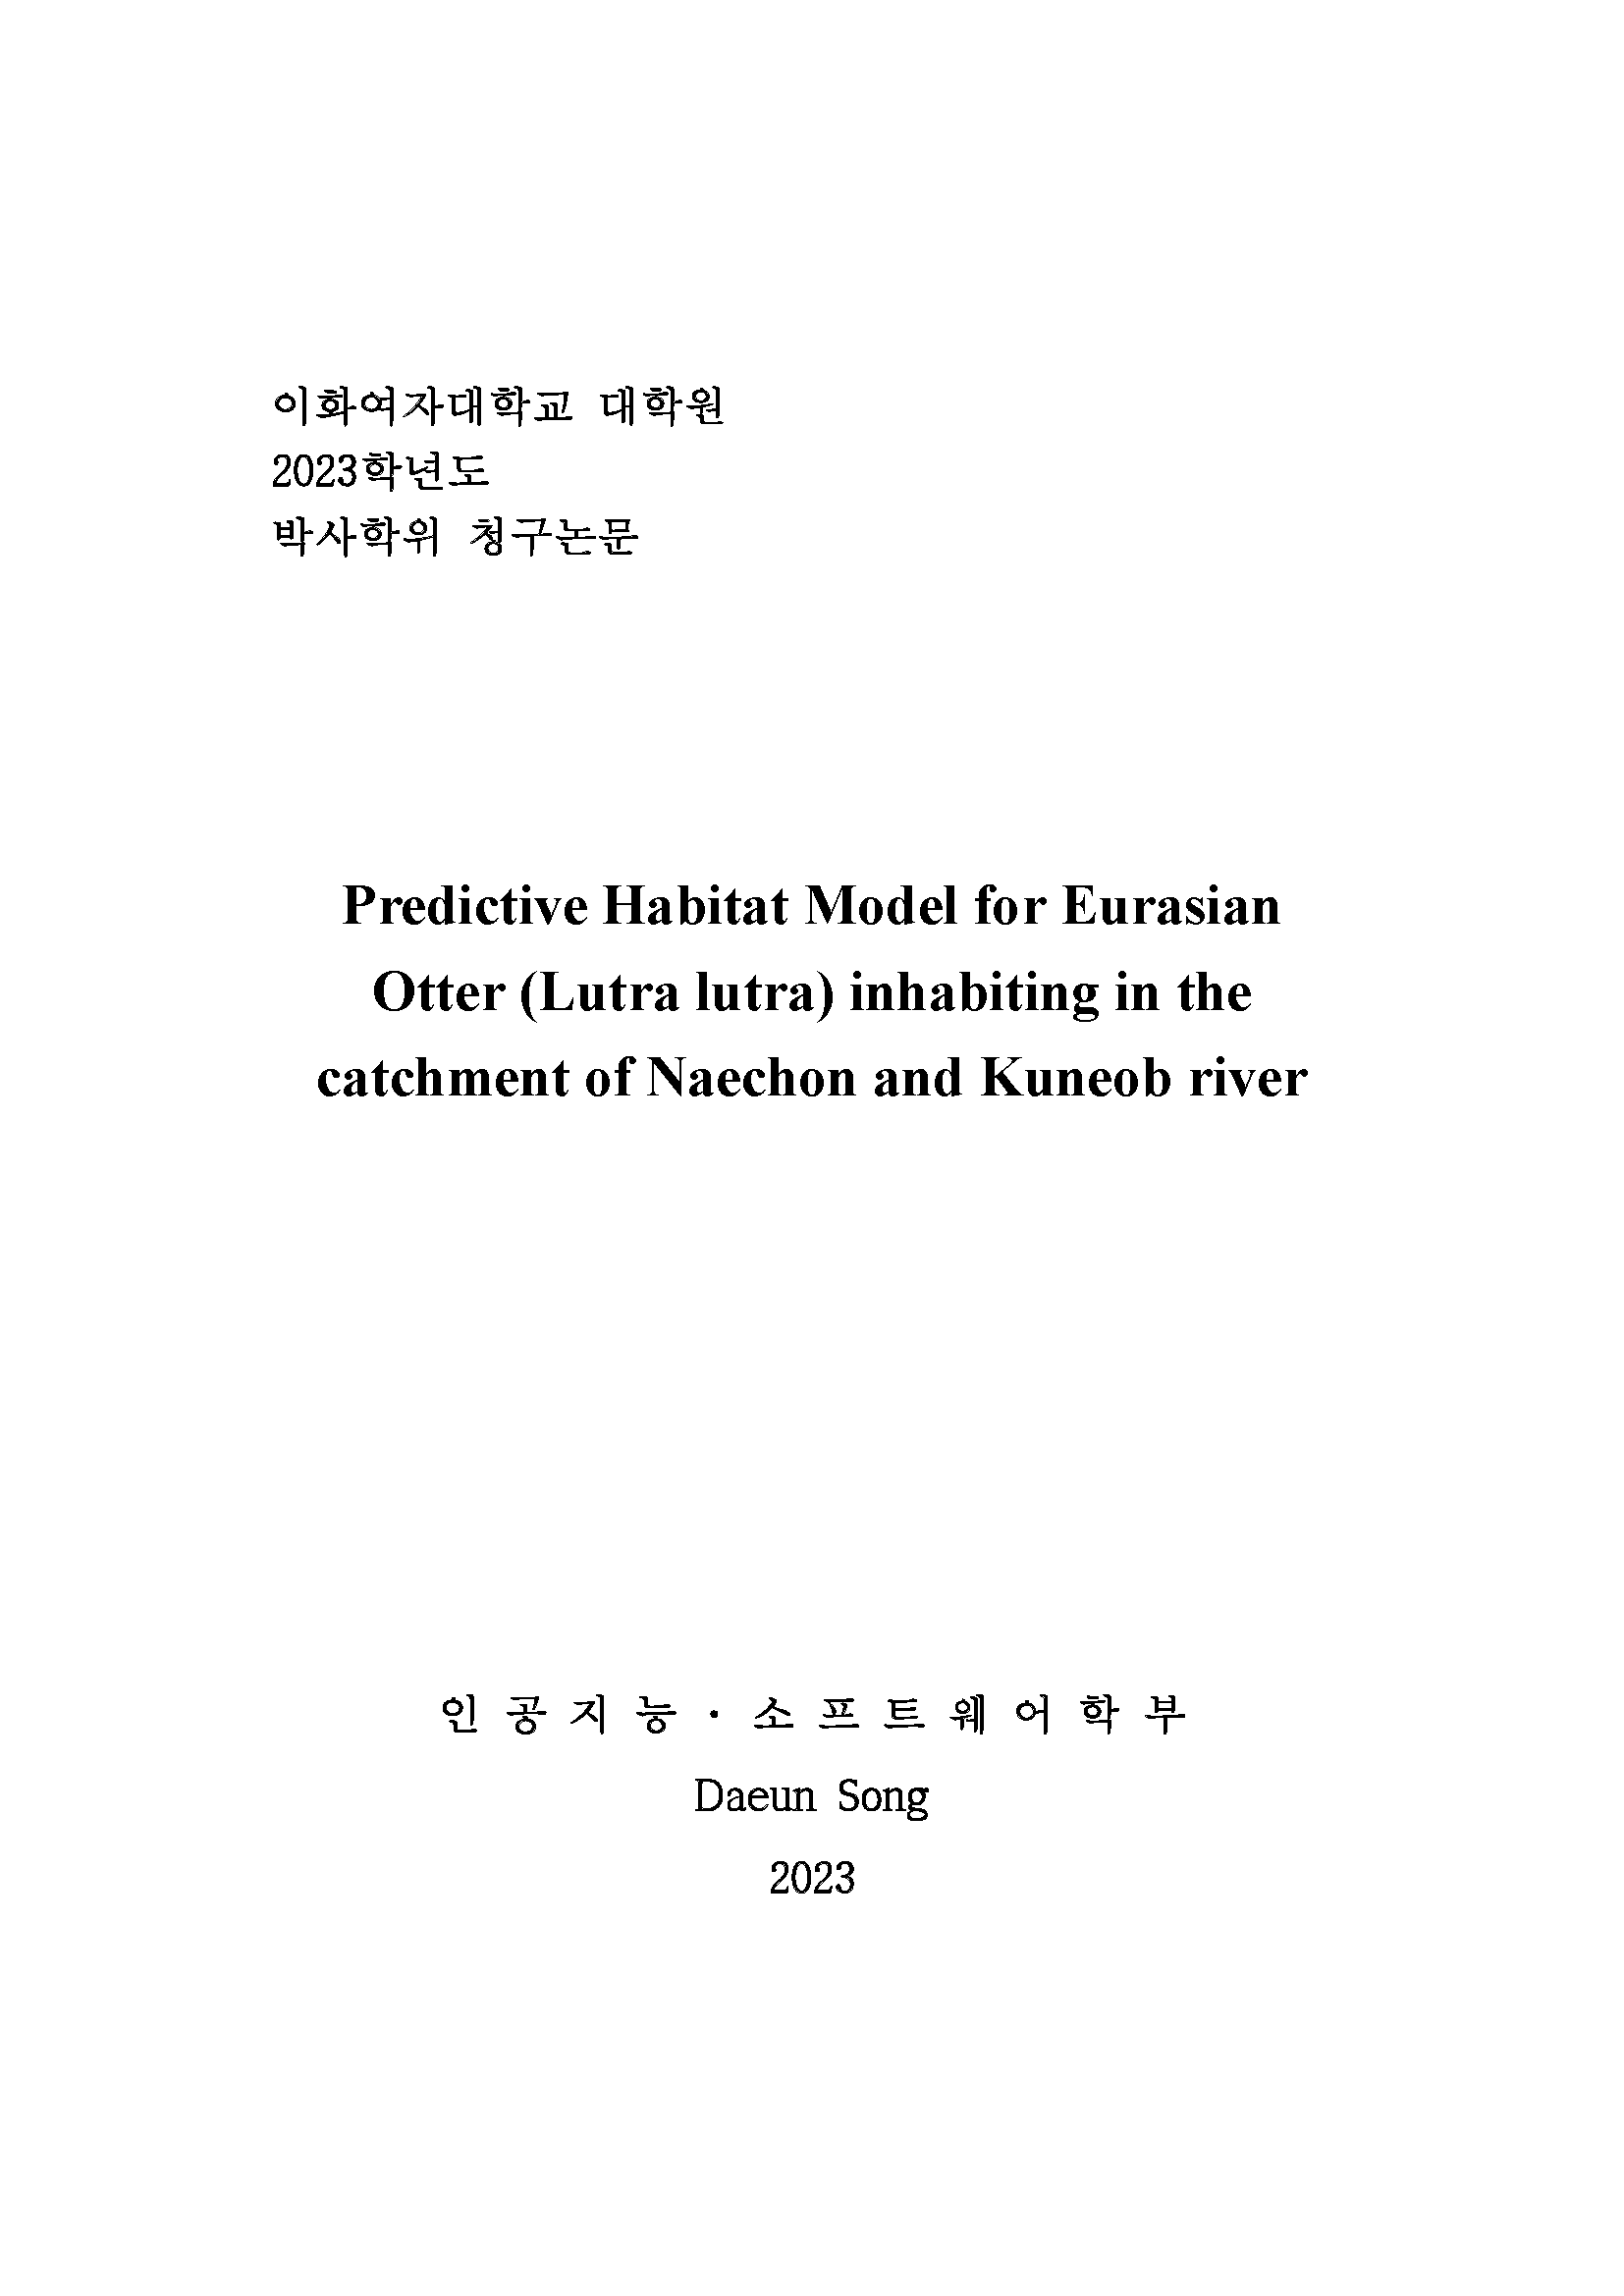 ewha_thesis_template_page_01.png